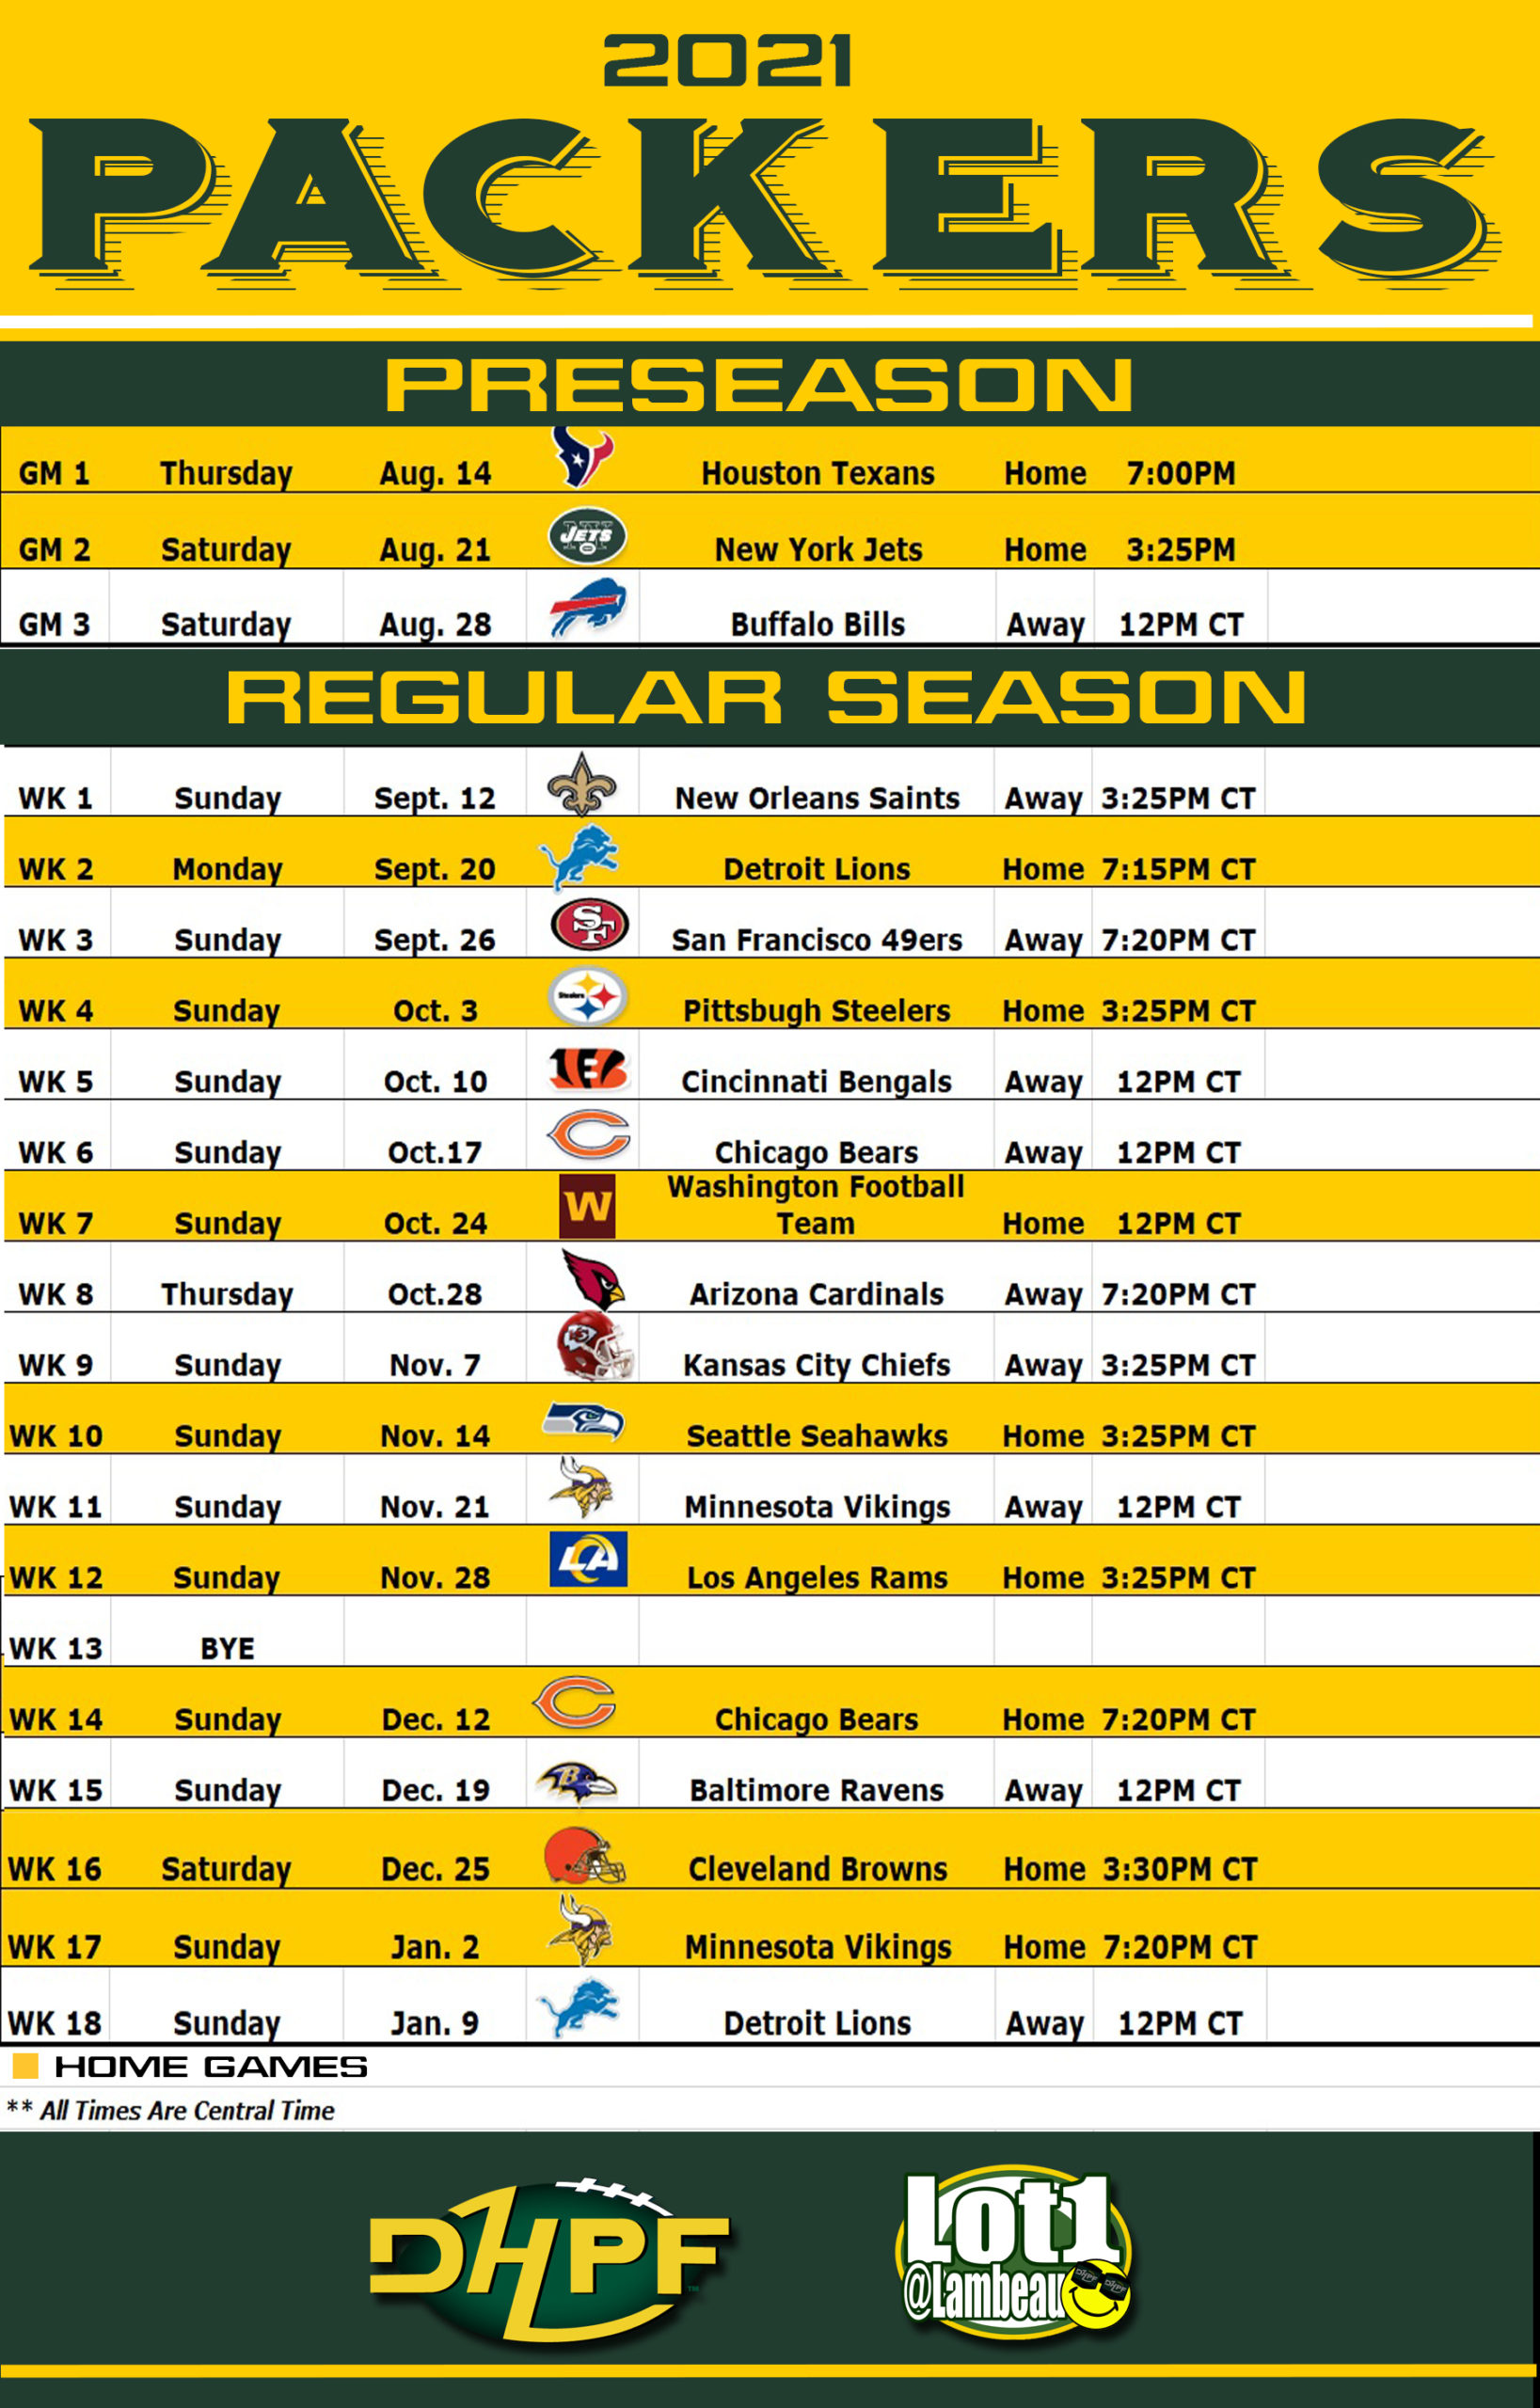 The Packers’ 202122 schedule and thoughts Die Hard Packer Fan